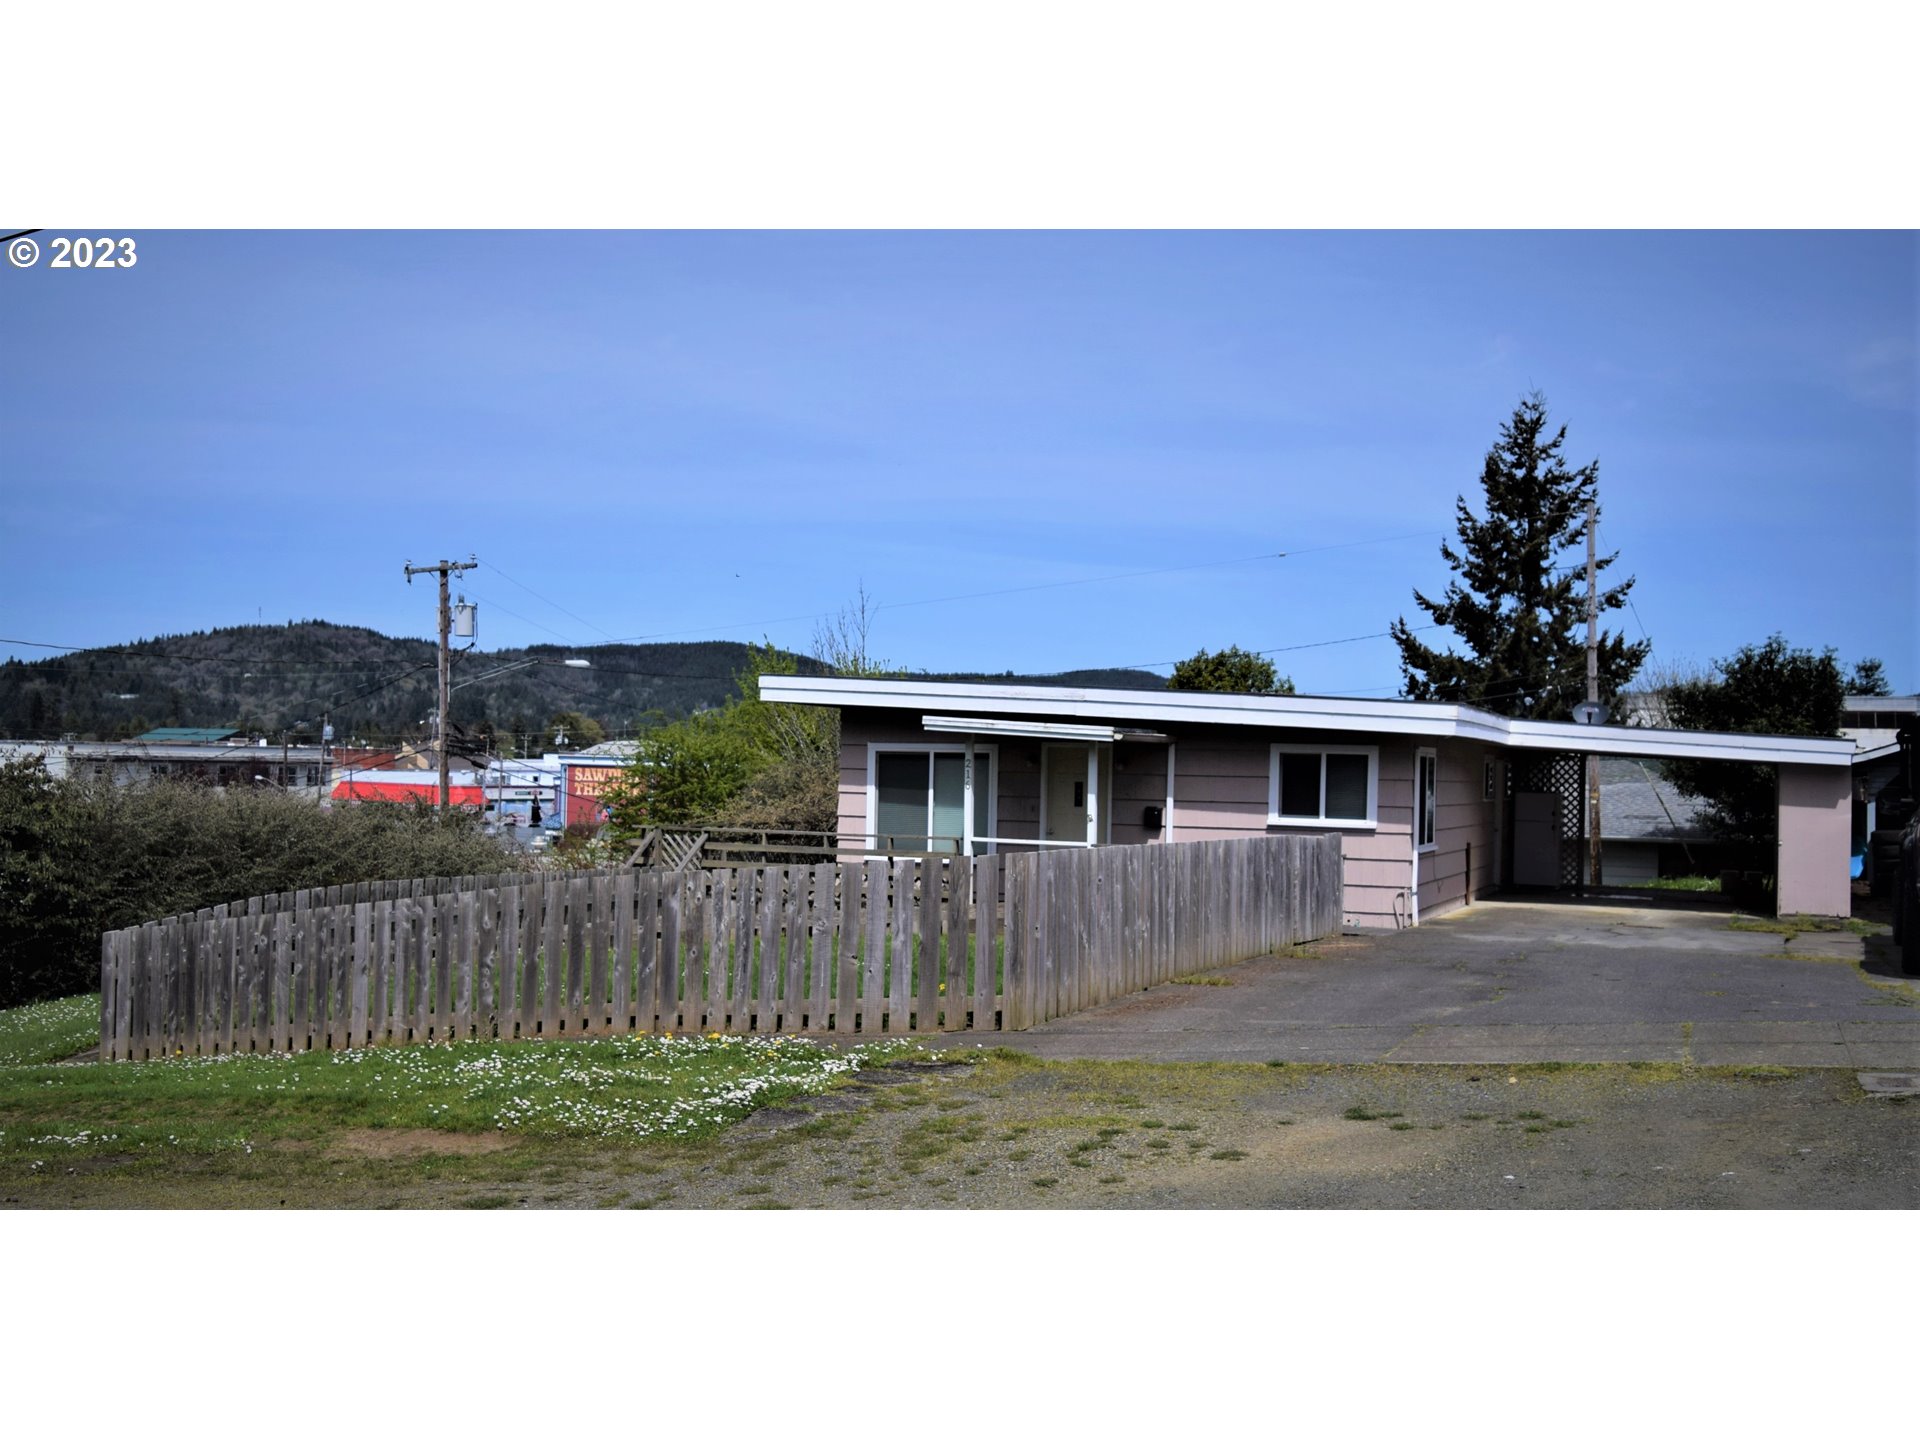 216 E MAIN ST, Coquille, OR 97423